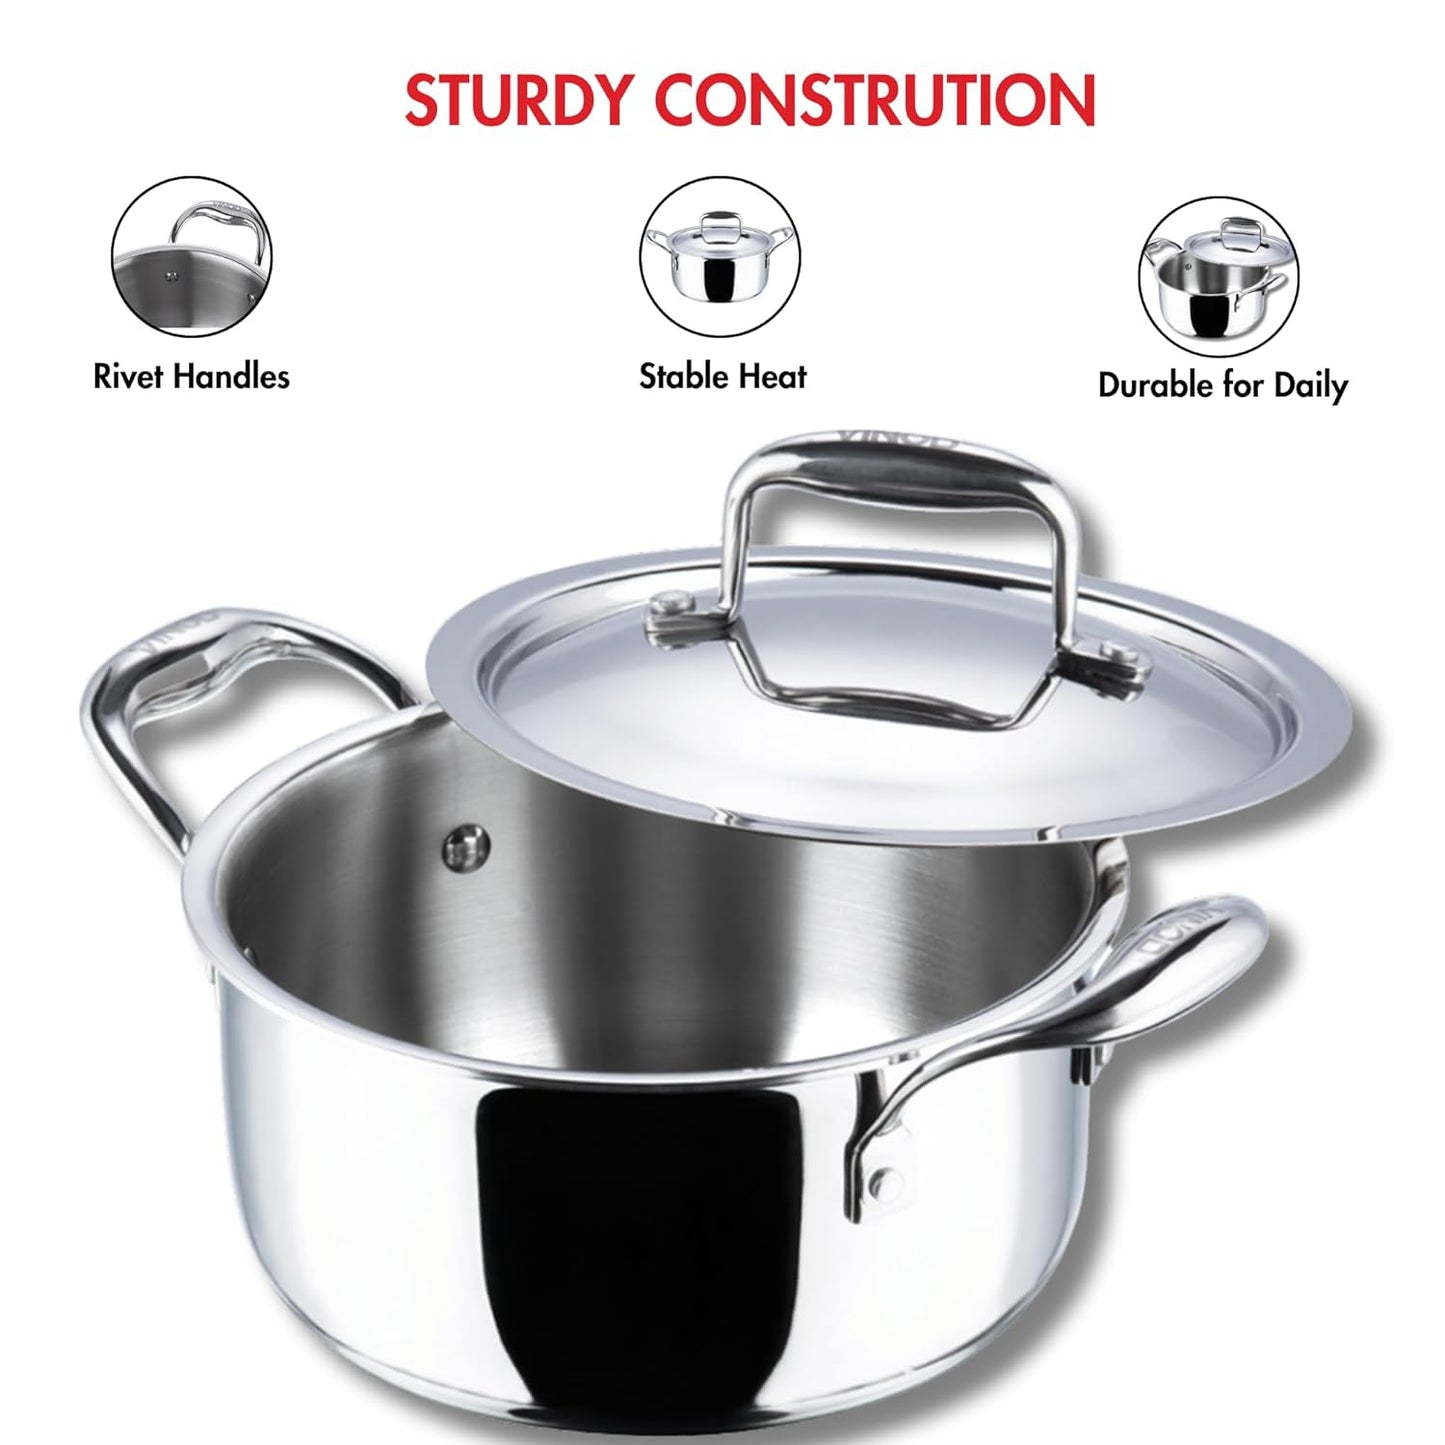 Stainless Steel Saucepot with Lid - 3 litre or 5 litre Cookware pot cooking pot with lid